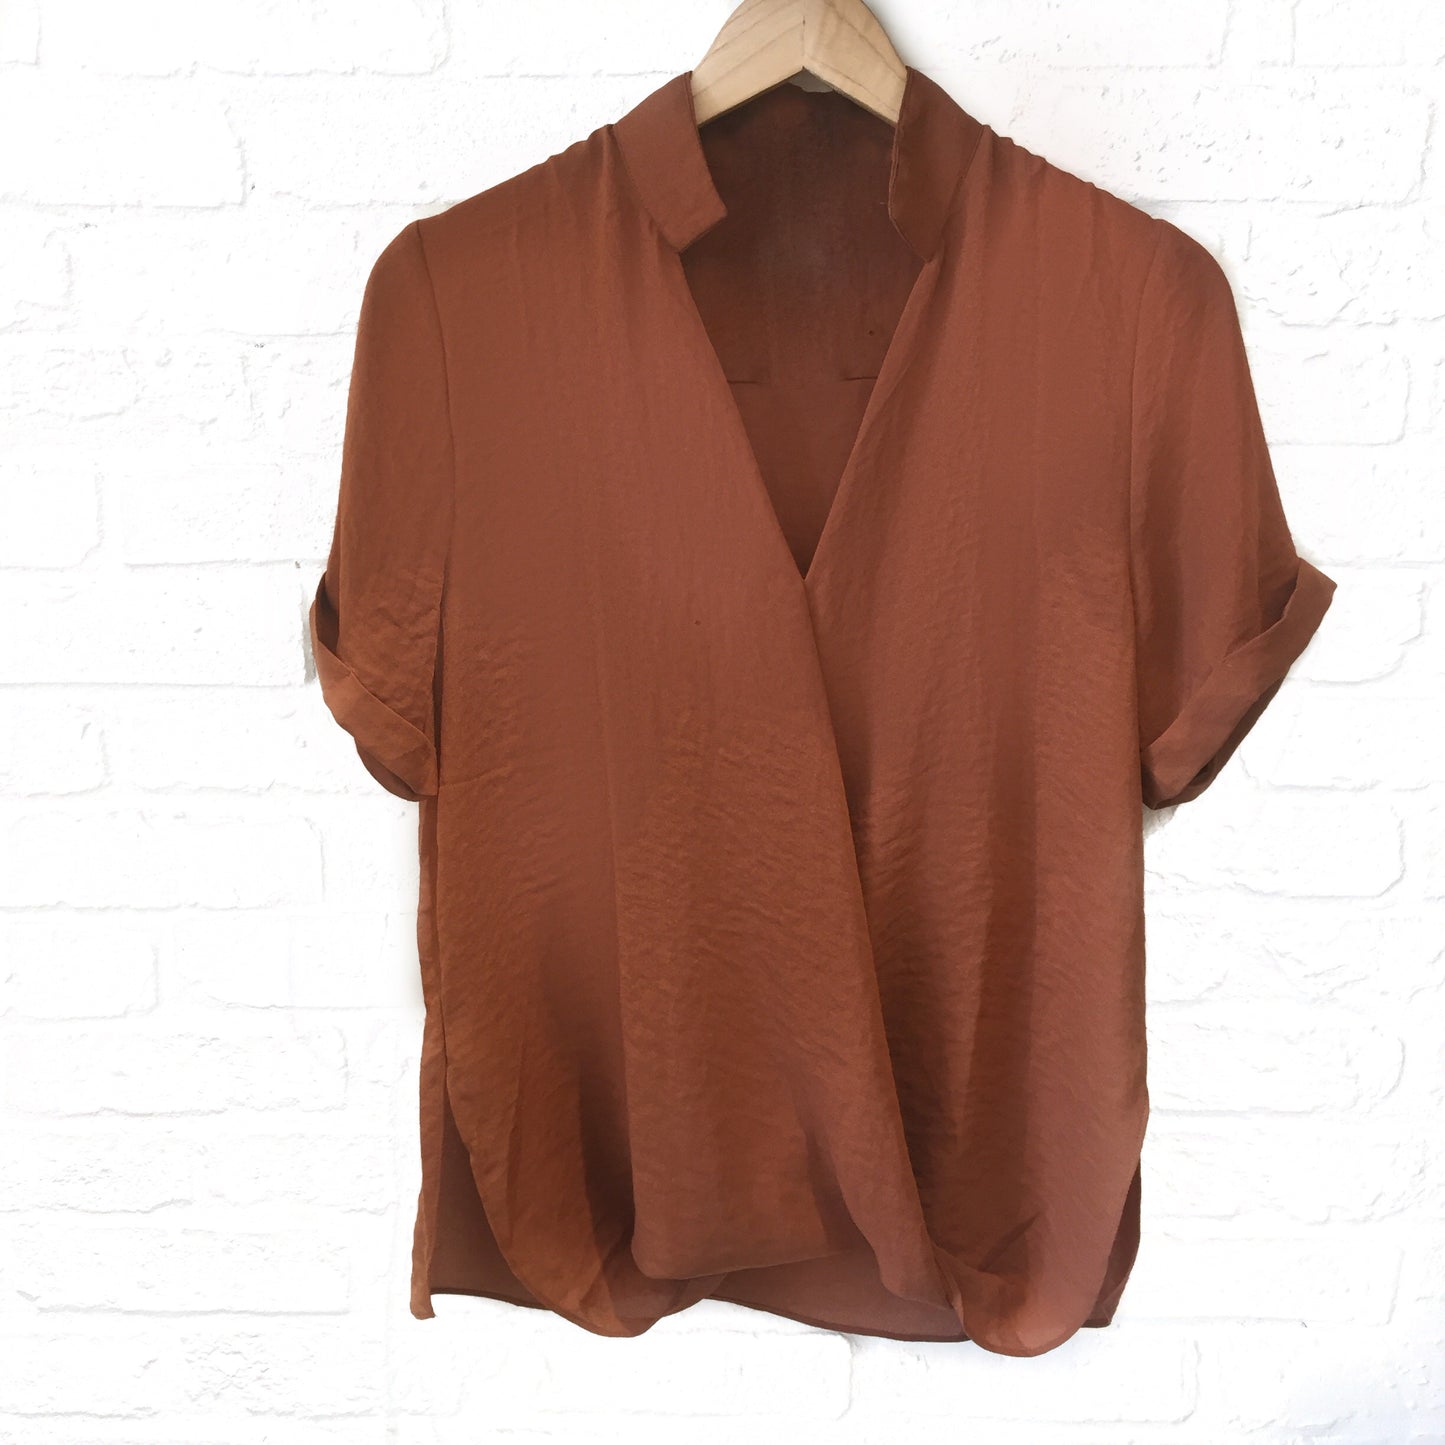 The Mulberry Top